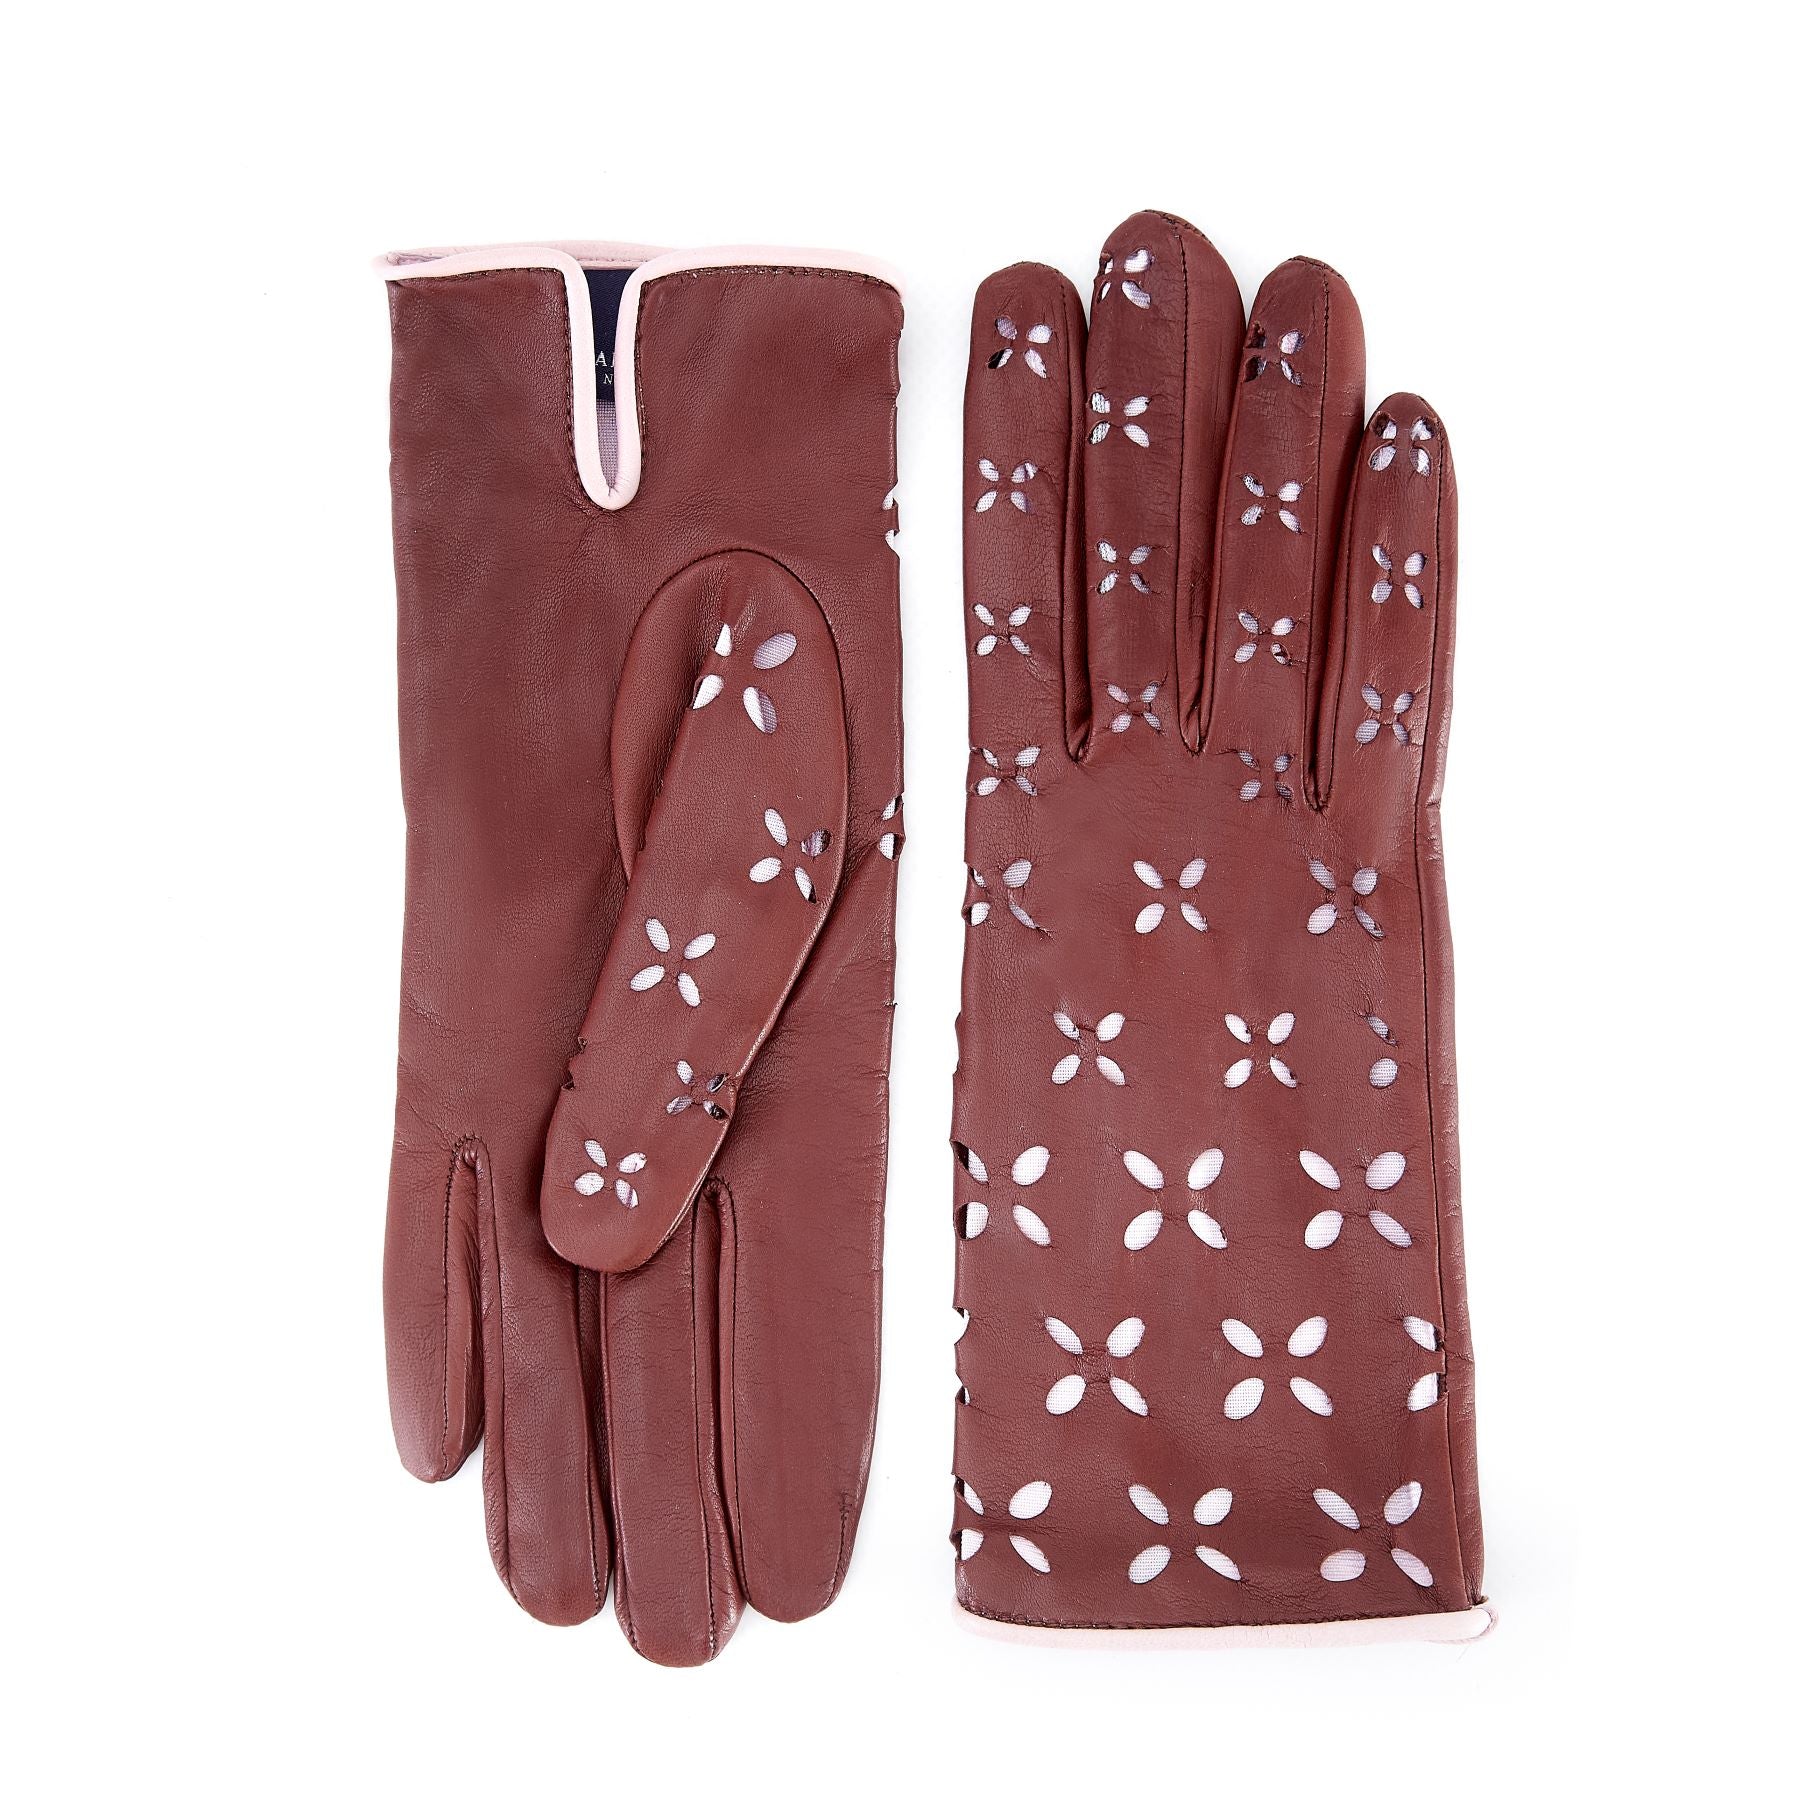 Women's light brown nappa leather gloves with laser cut petals detail and polyamide lining